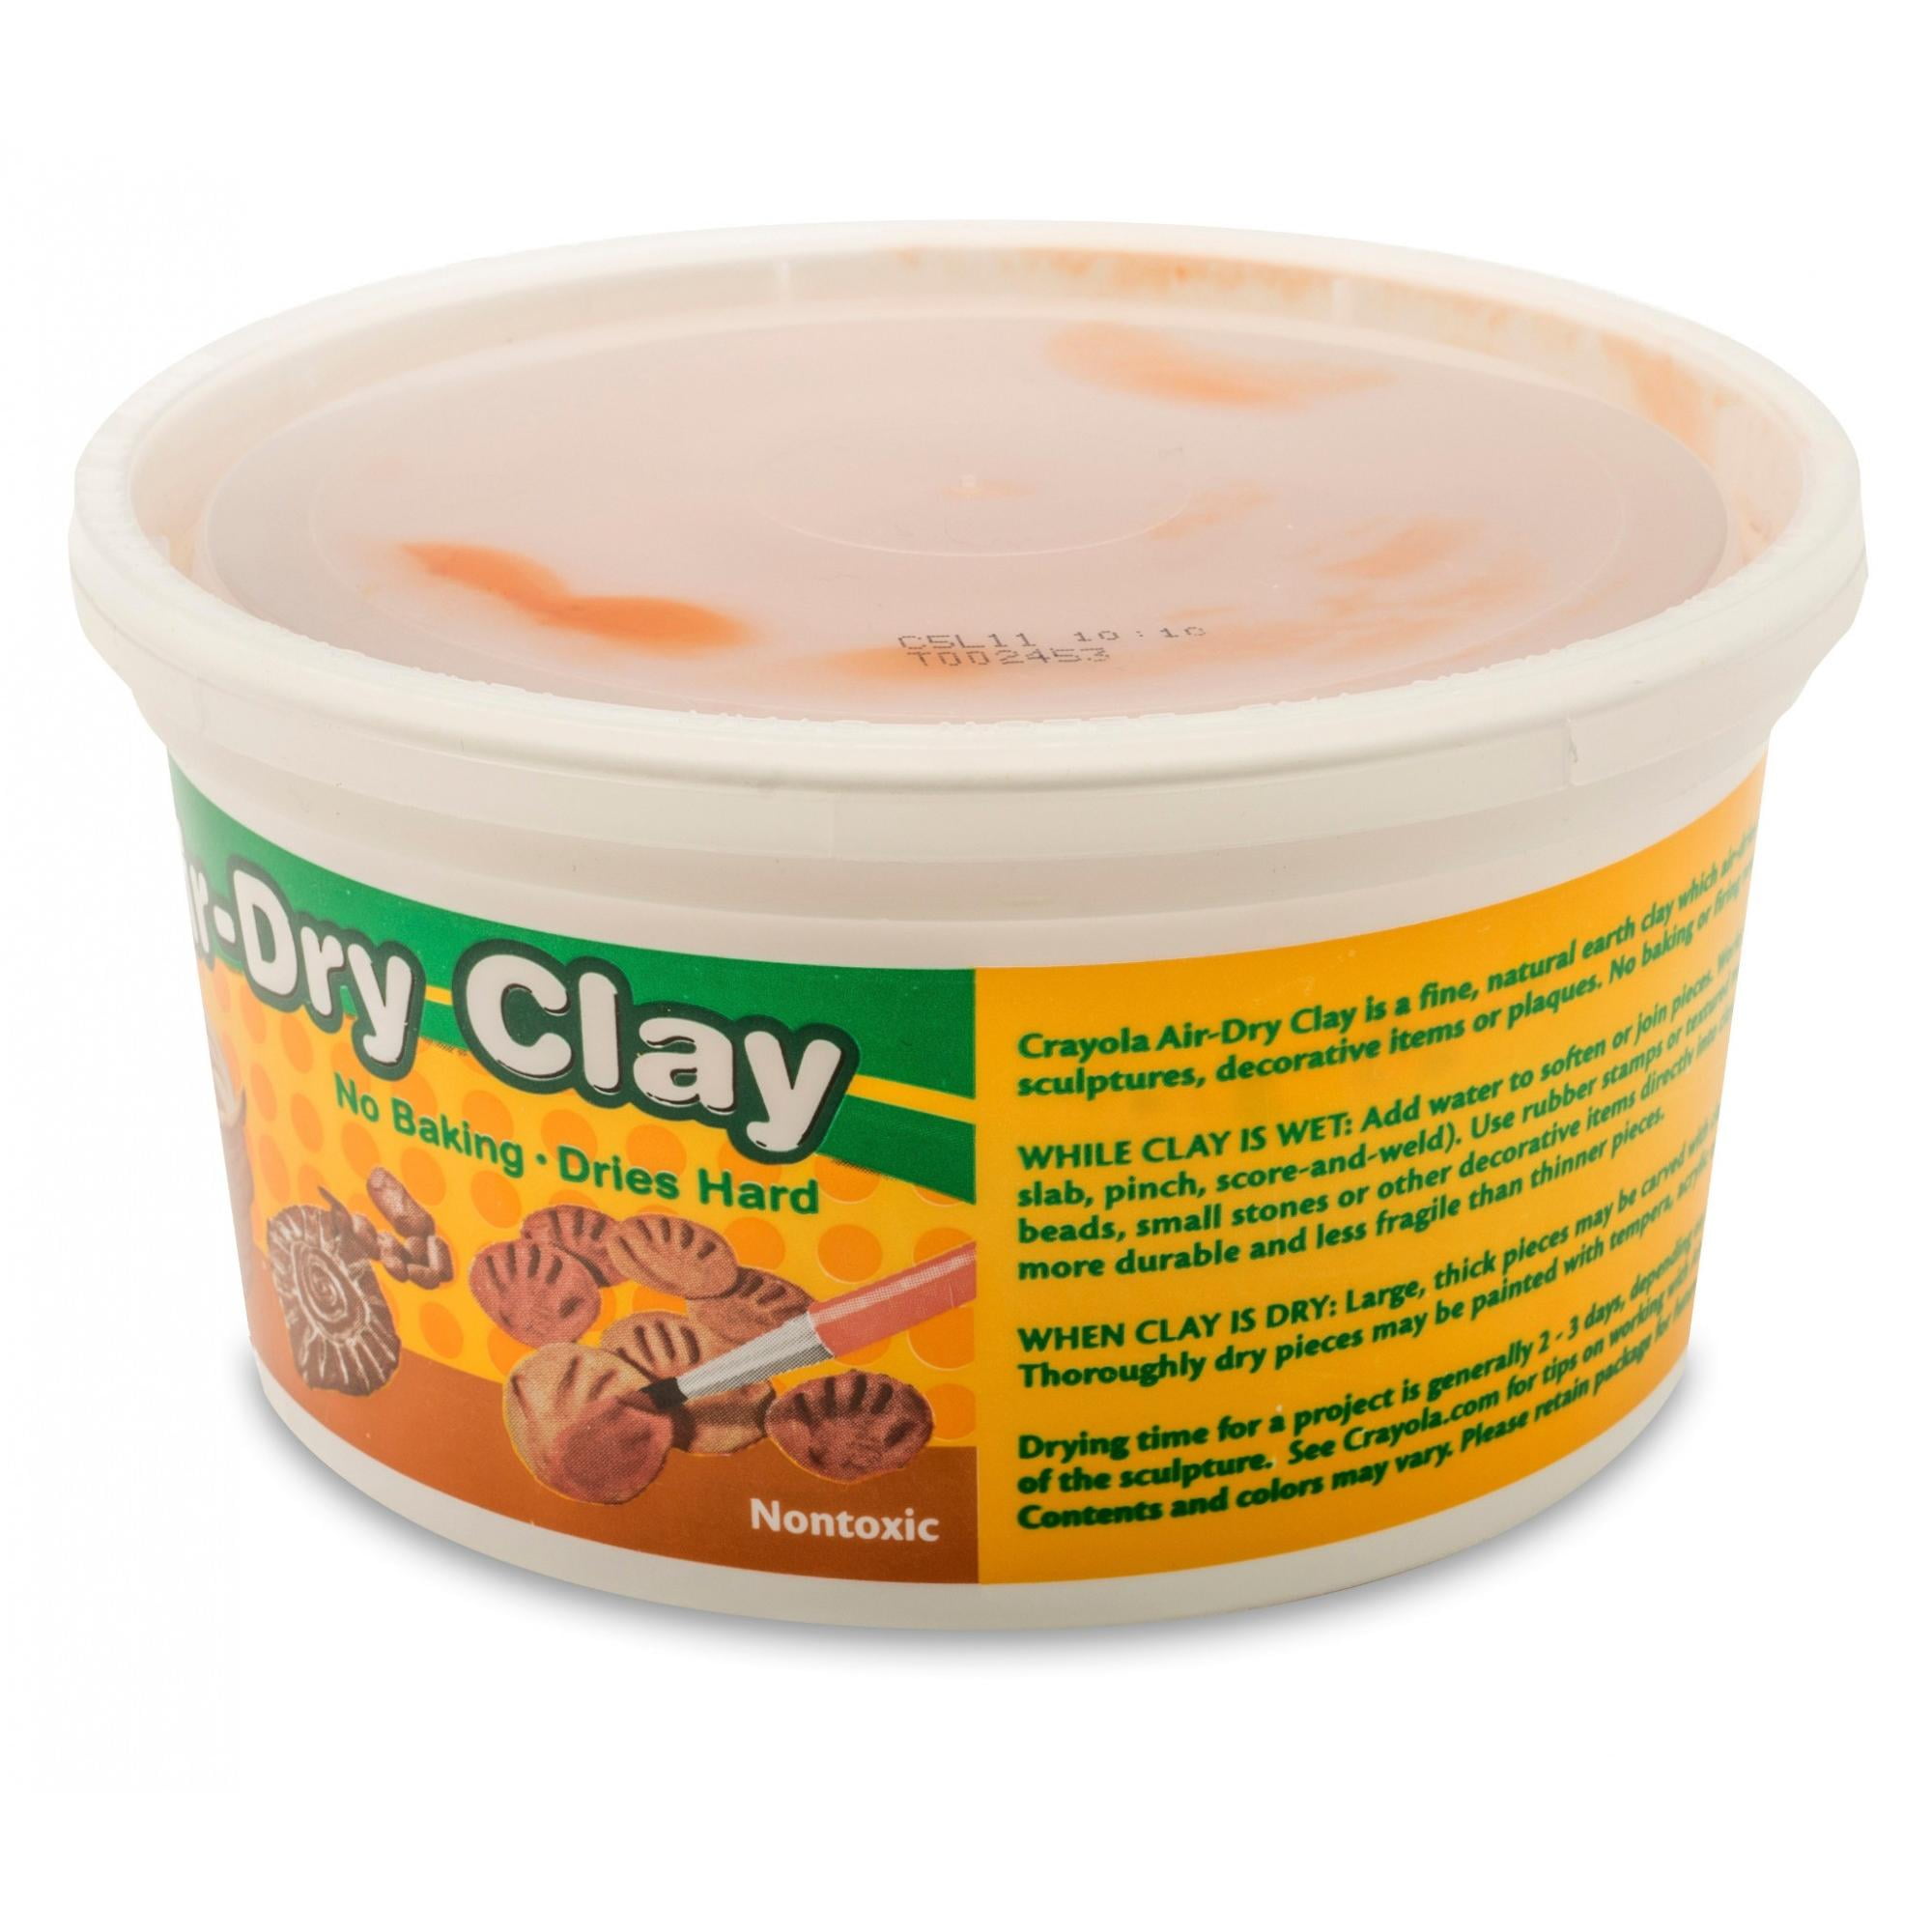 Buy Crayola® Air-Dry Clay Classpack® 2.5 lb Tubs - Classic Colors